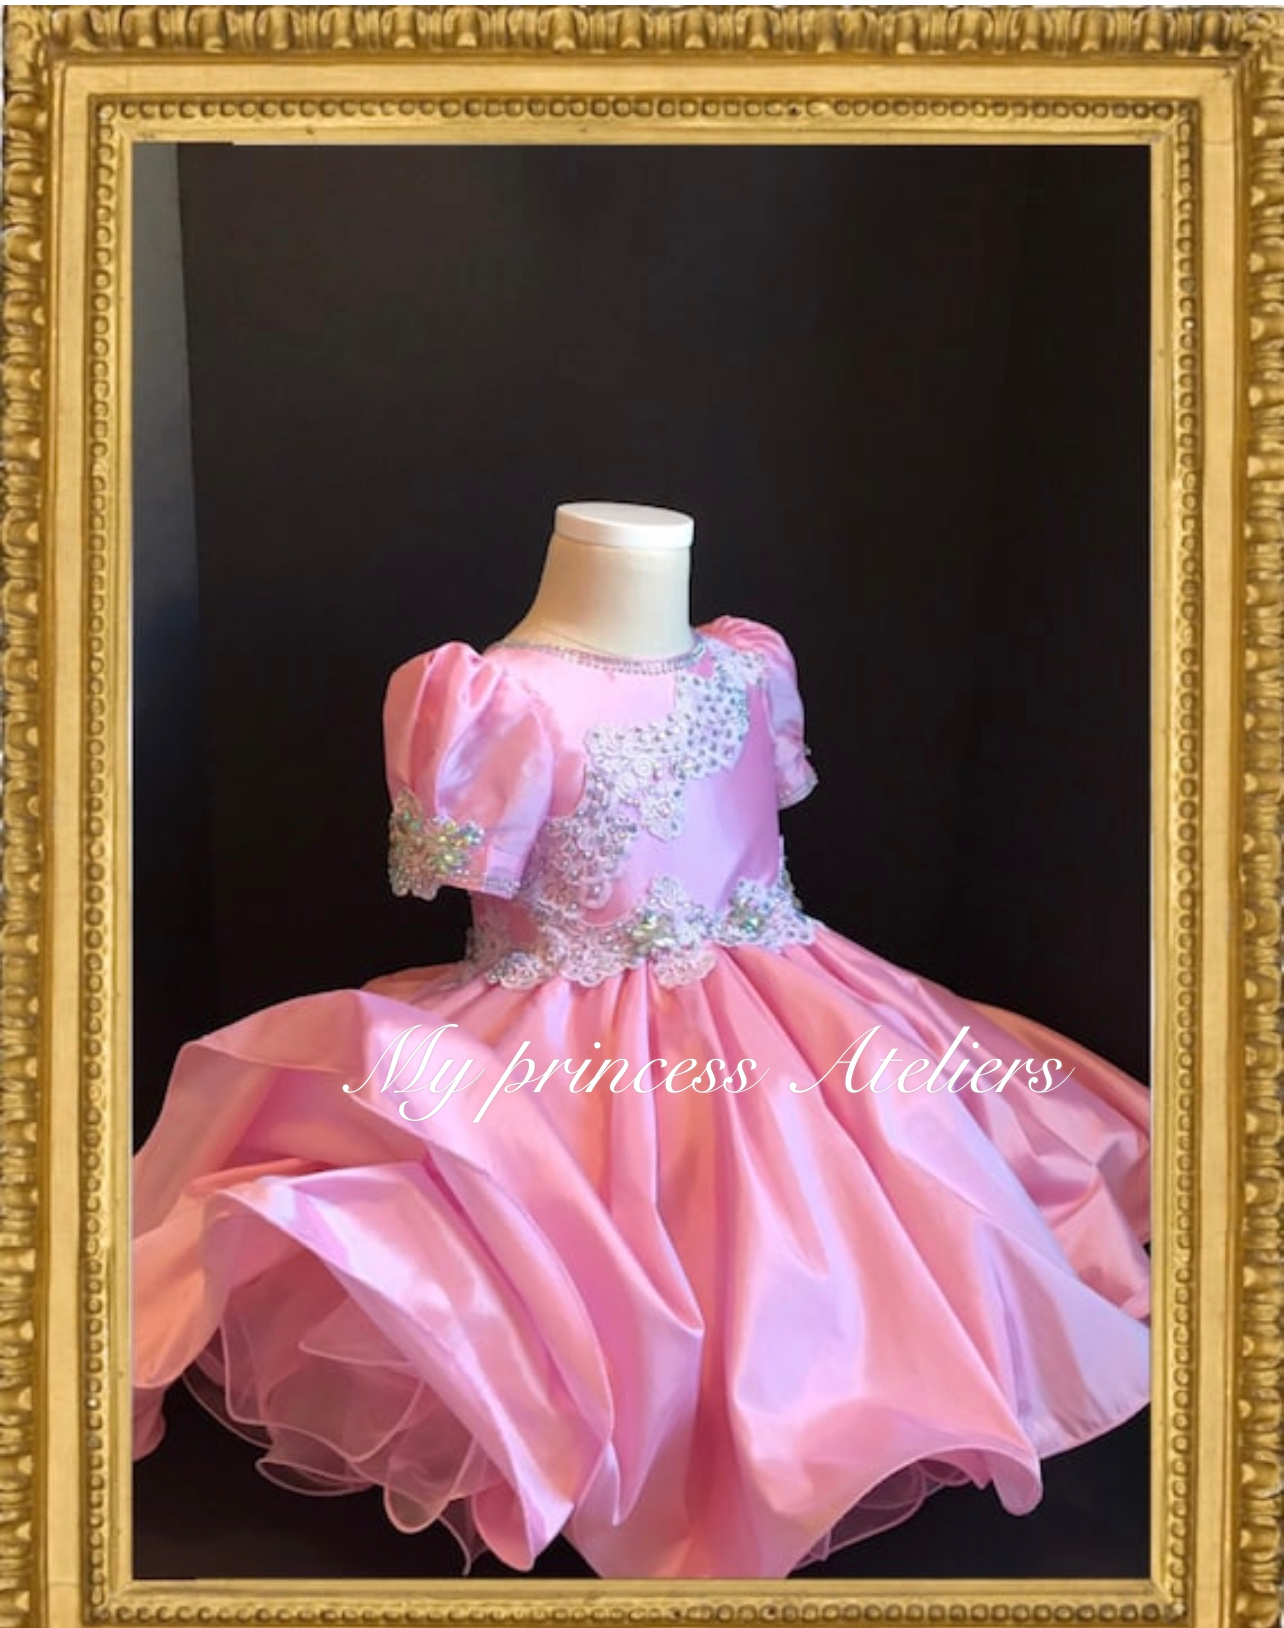 Natural pageant dress, pink couture girl dress, princess pink taffeta dress, pink glitz pageant dress, pink flower girl birthday dress